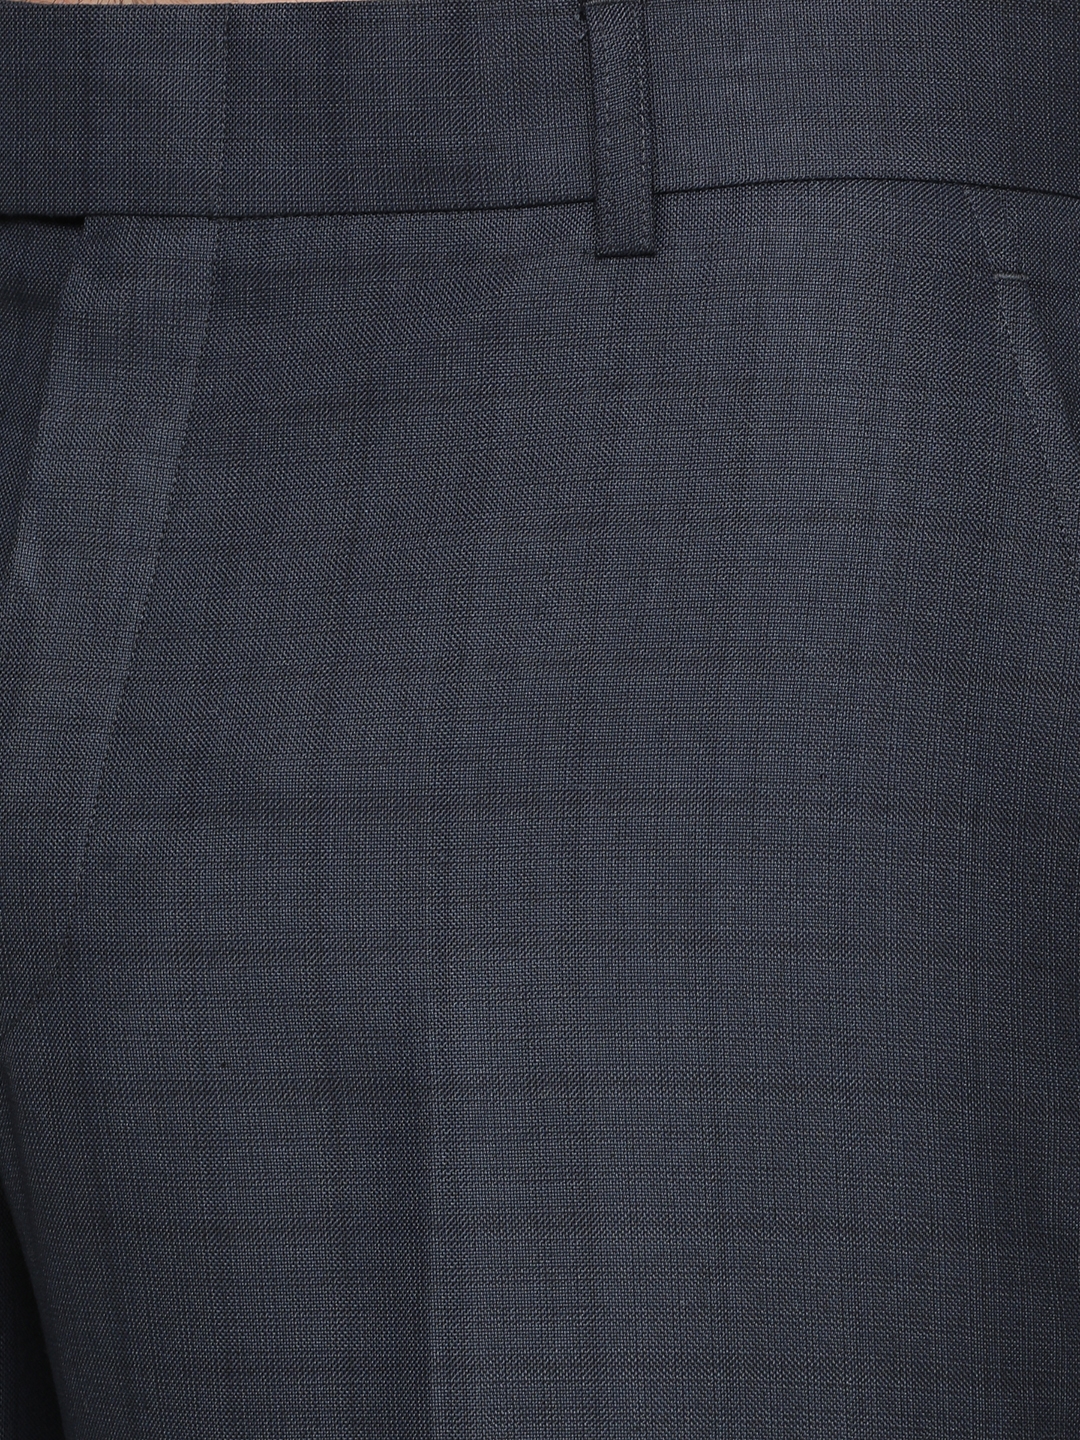 Greenfibre | Blue Checked Classic Fit Formal Trouser | Greenfibre 4